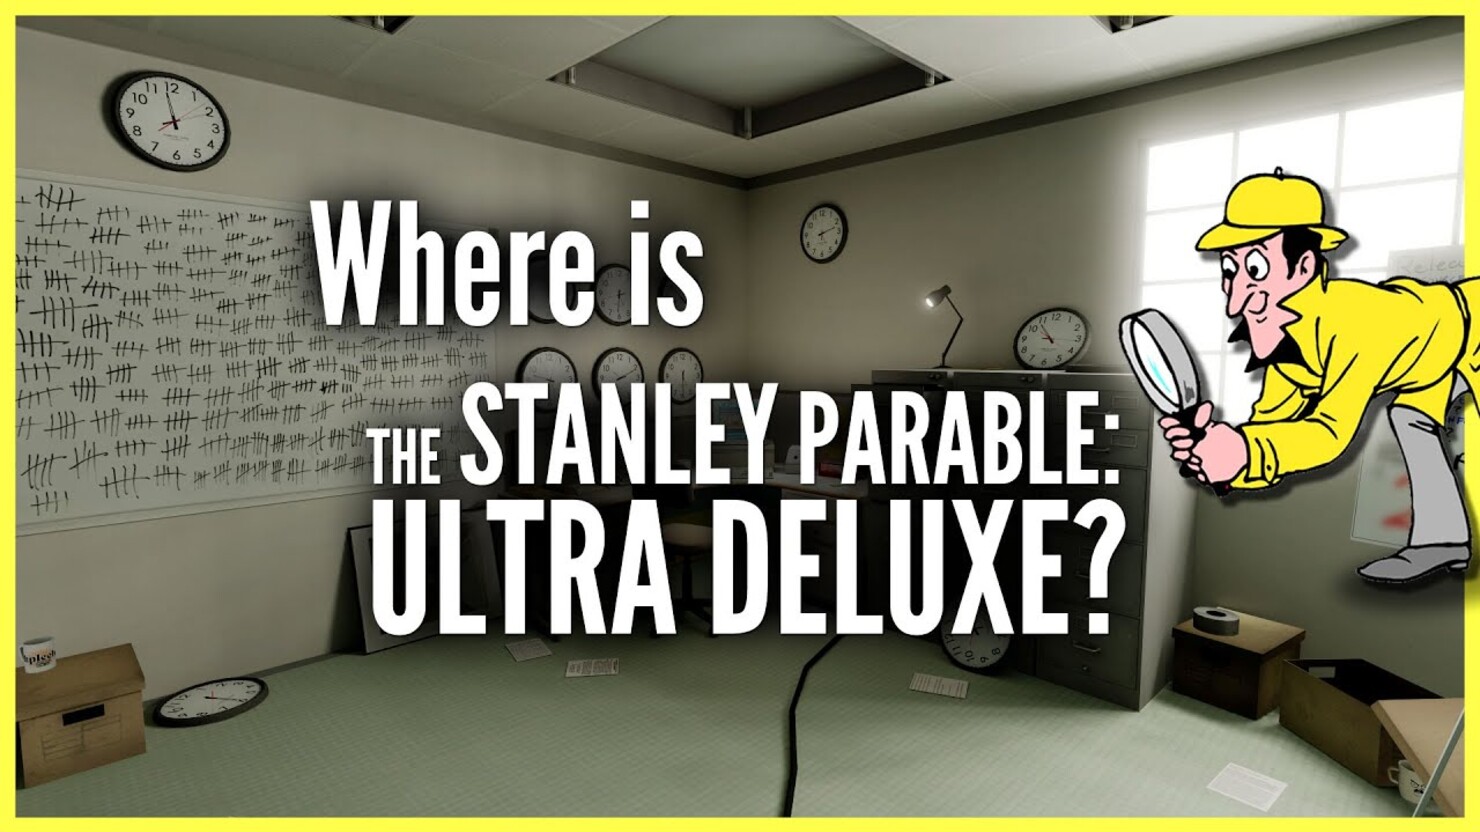 Stanley ultra deluxe. Stanley Parable Ultra Deluxe Стэнли. The Stanley Parable: Ultra Deluxe. The Stanley Parable на андроид. The Stanley Parable Ultra Deluxe v.1.05 (2022).